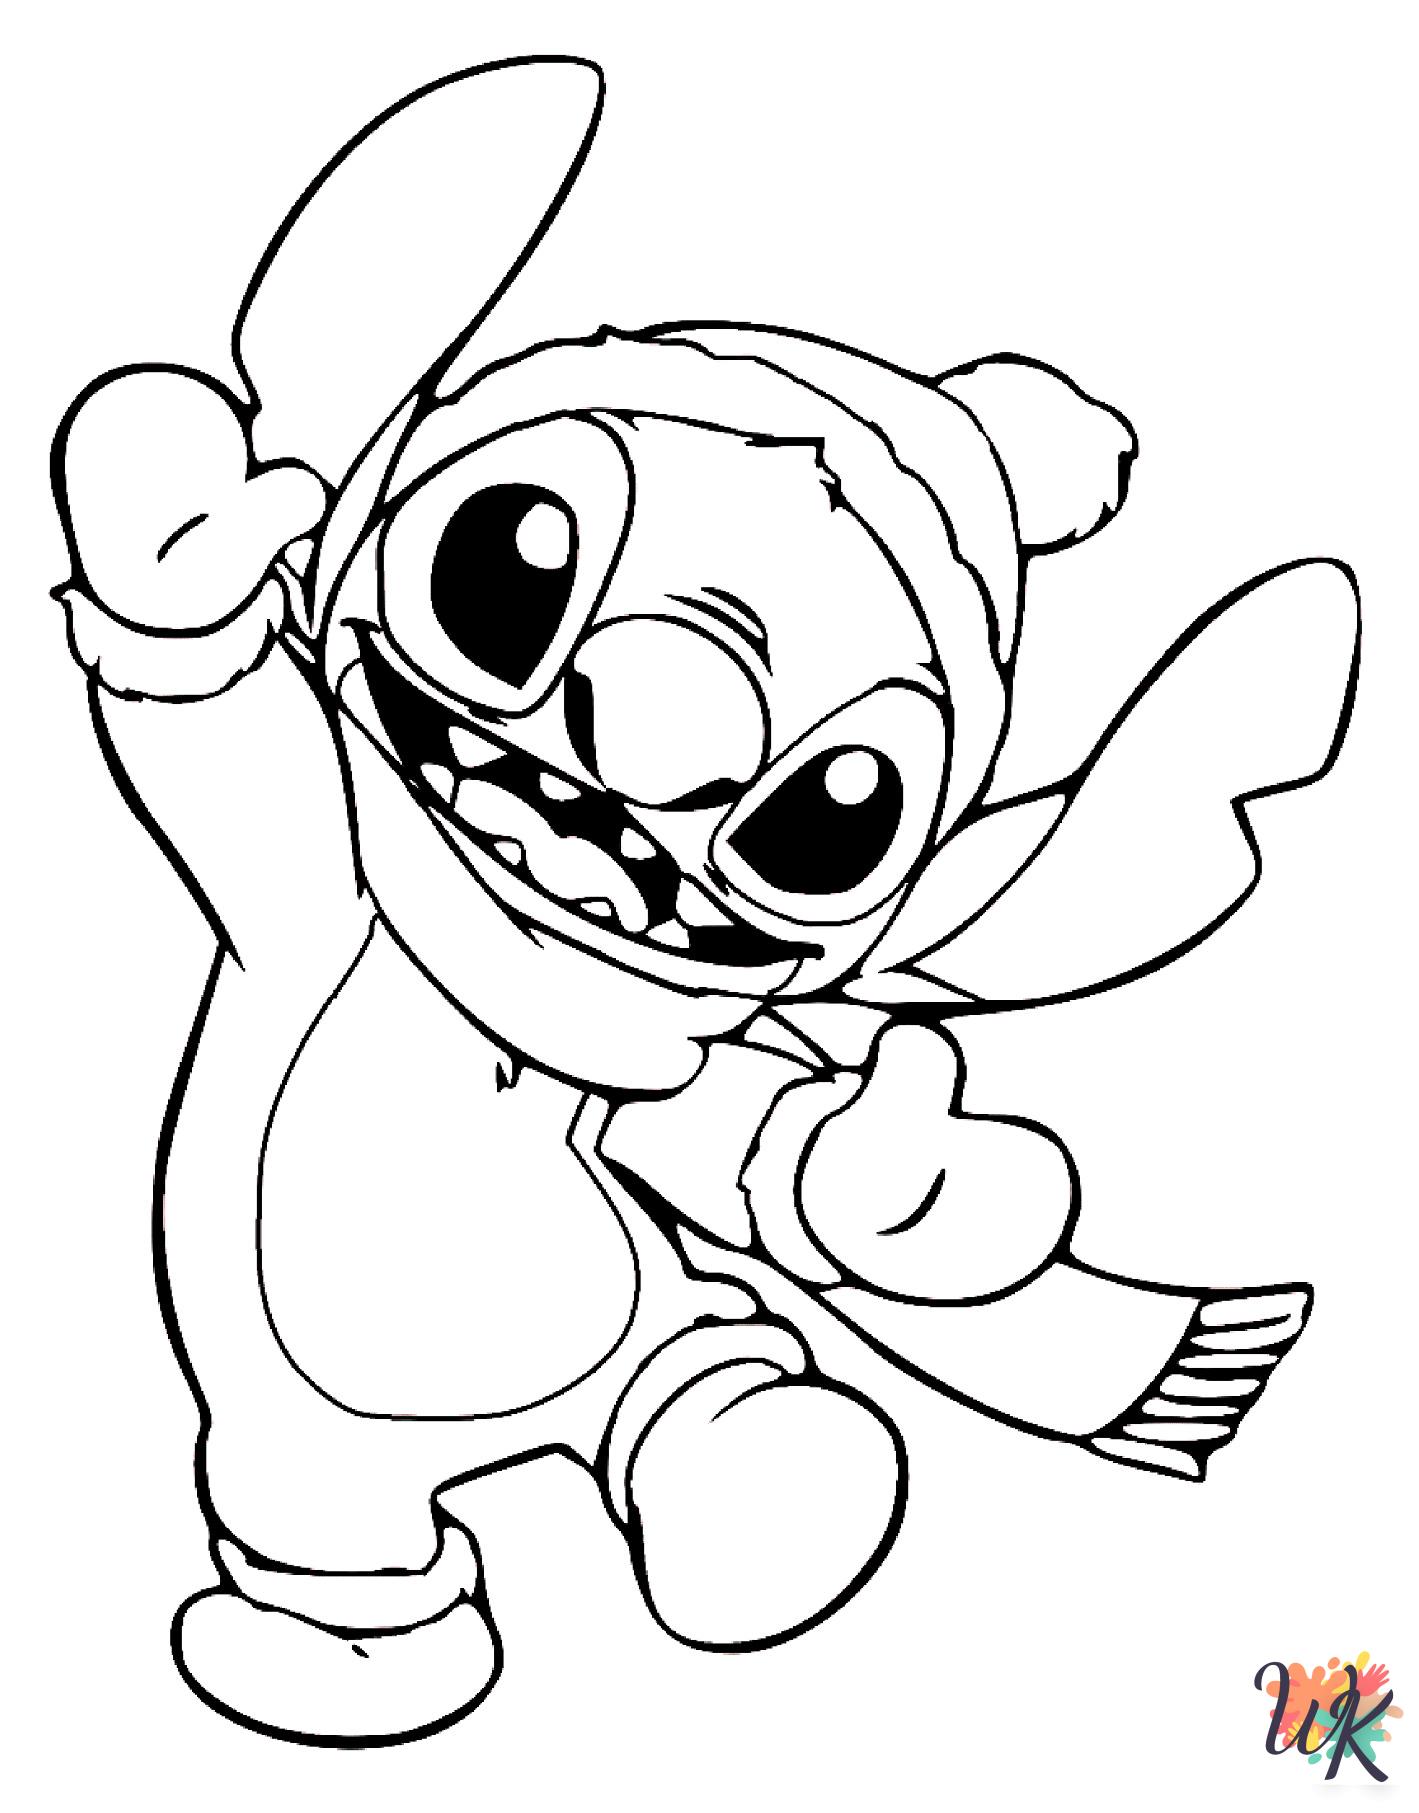 Stitch adult coloring pages